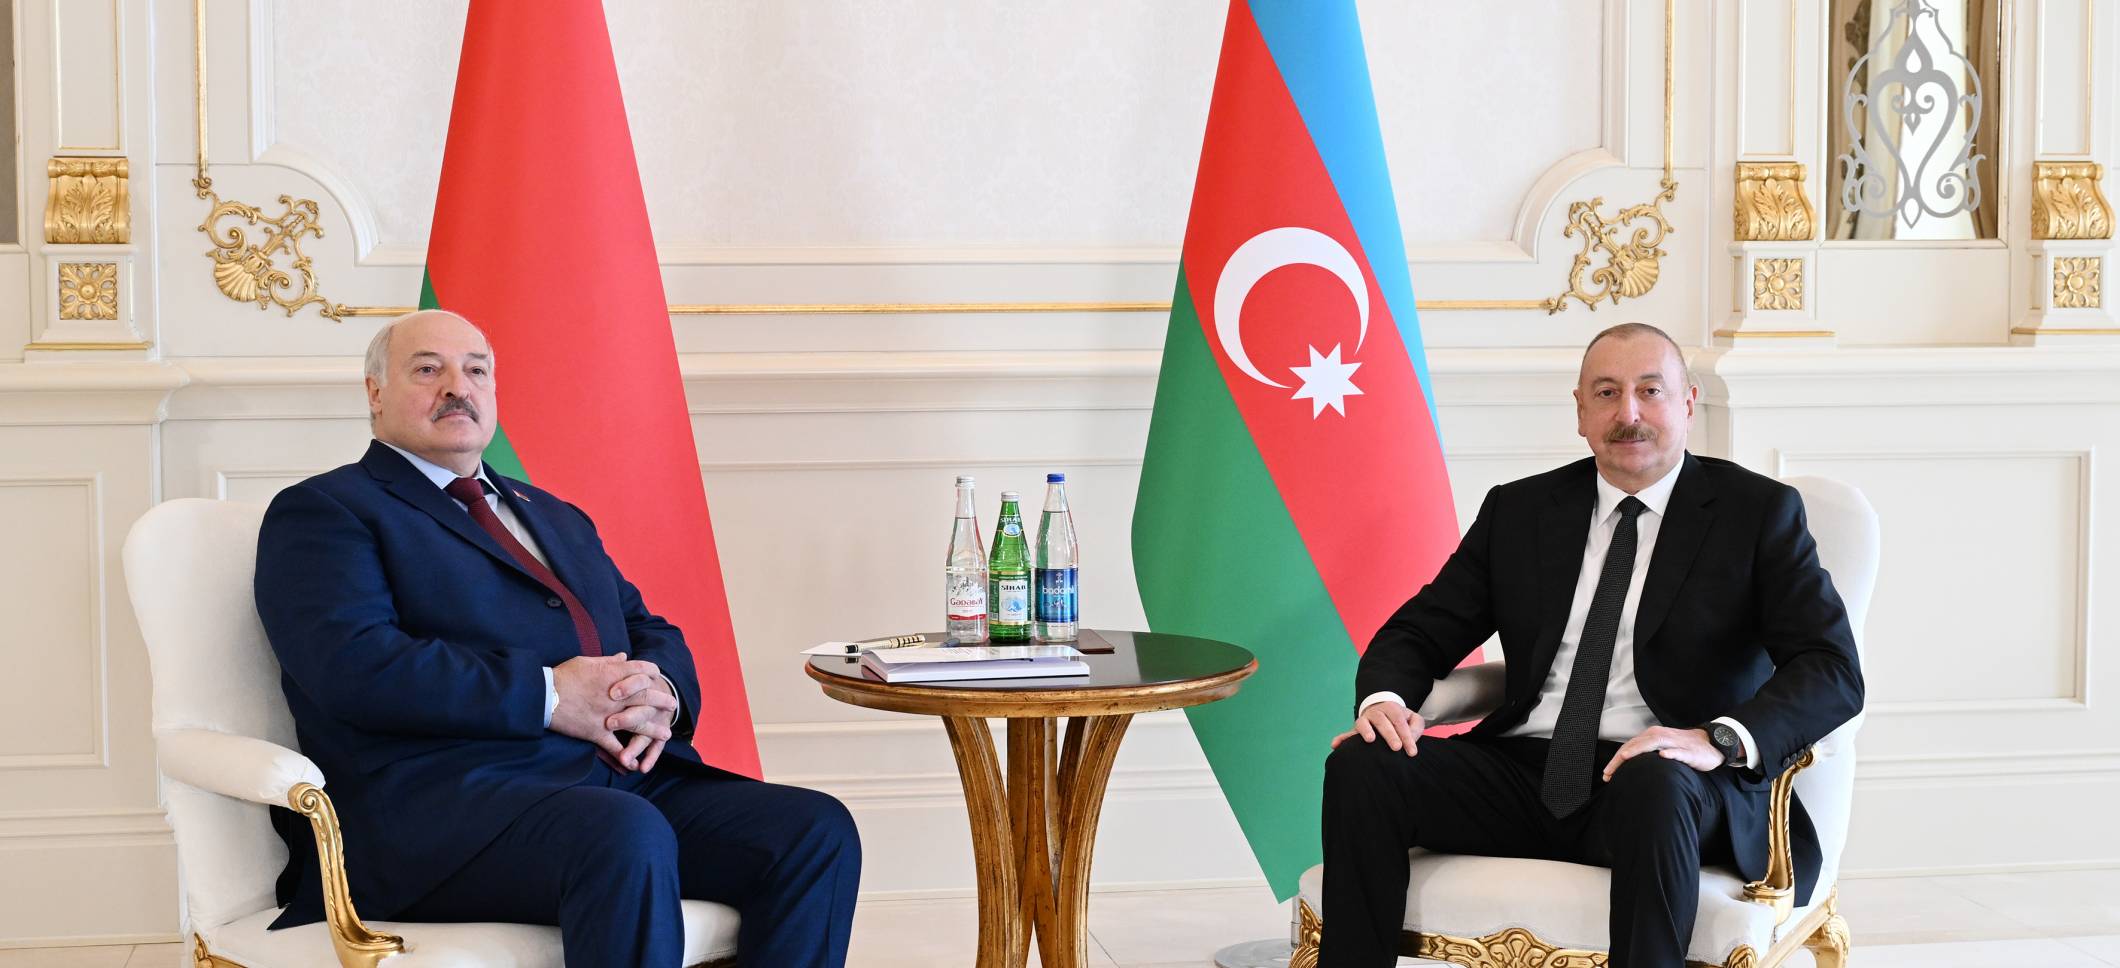 One-on-one meeting between Azerbaijani and Belarusian Presidents started